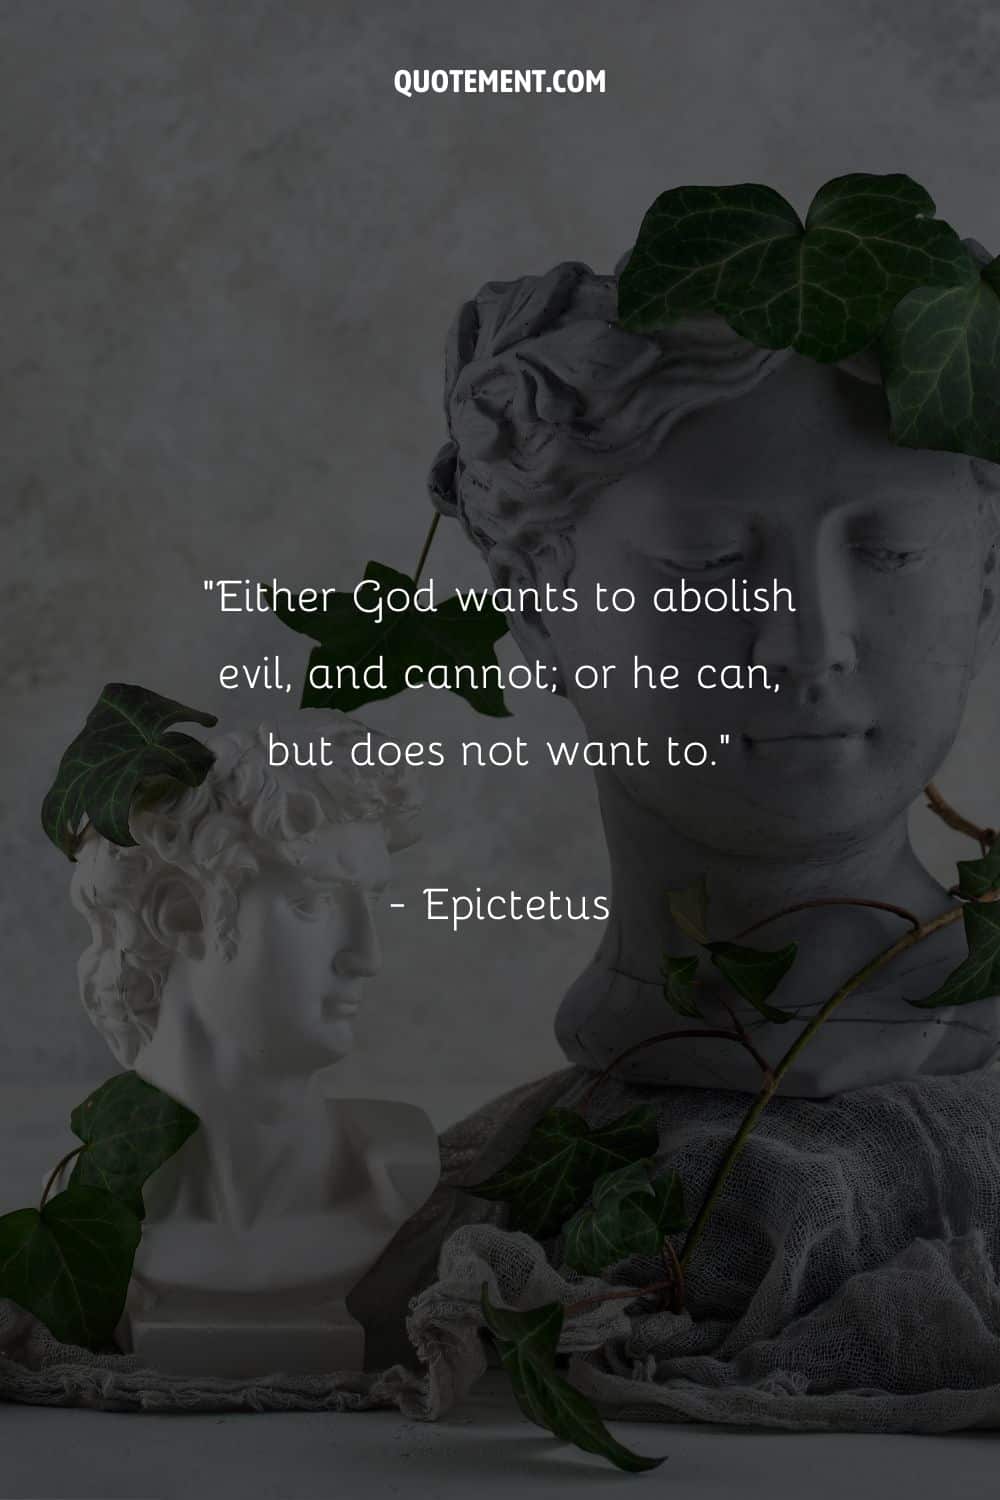 Either God wants to abolish evil, and cannot; or he can, but does not want to.